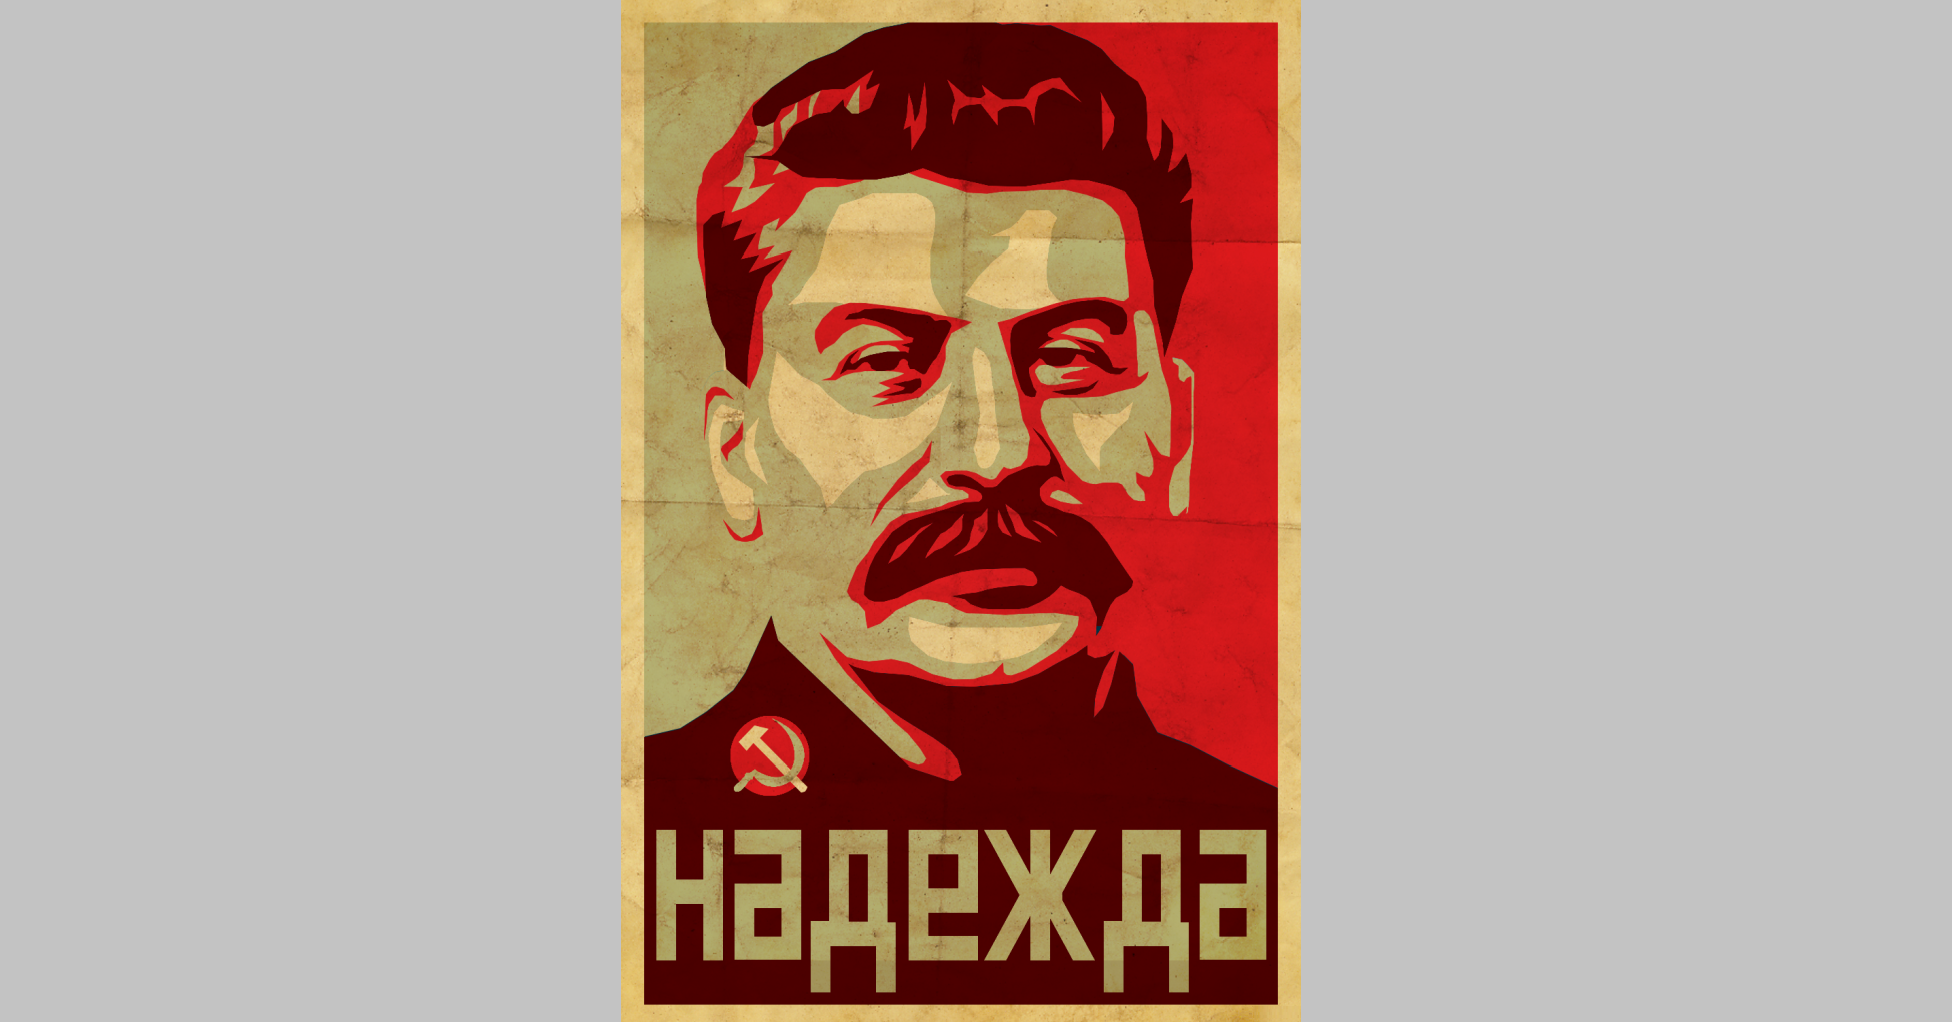 A recent Russian propaganda poster for Joseph Stalin copied after the popular Barack Obama "Hope" poster from his 2008 election campaign. (Image: social media)